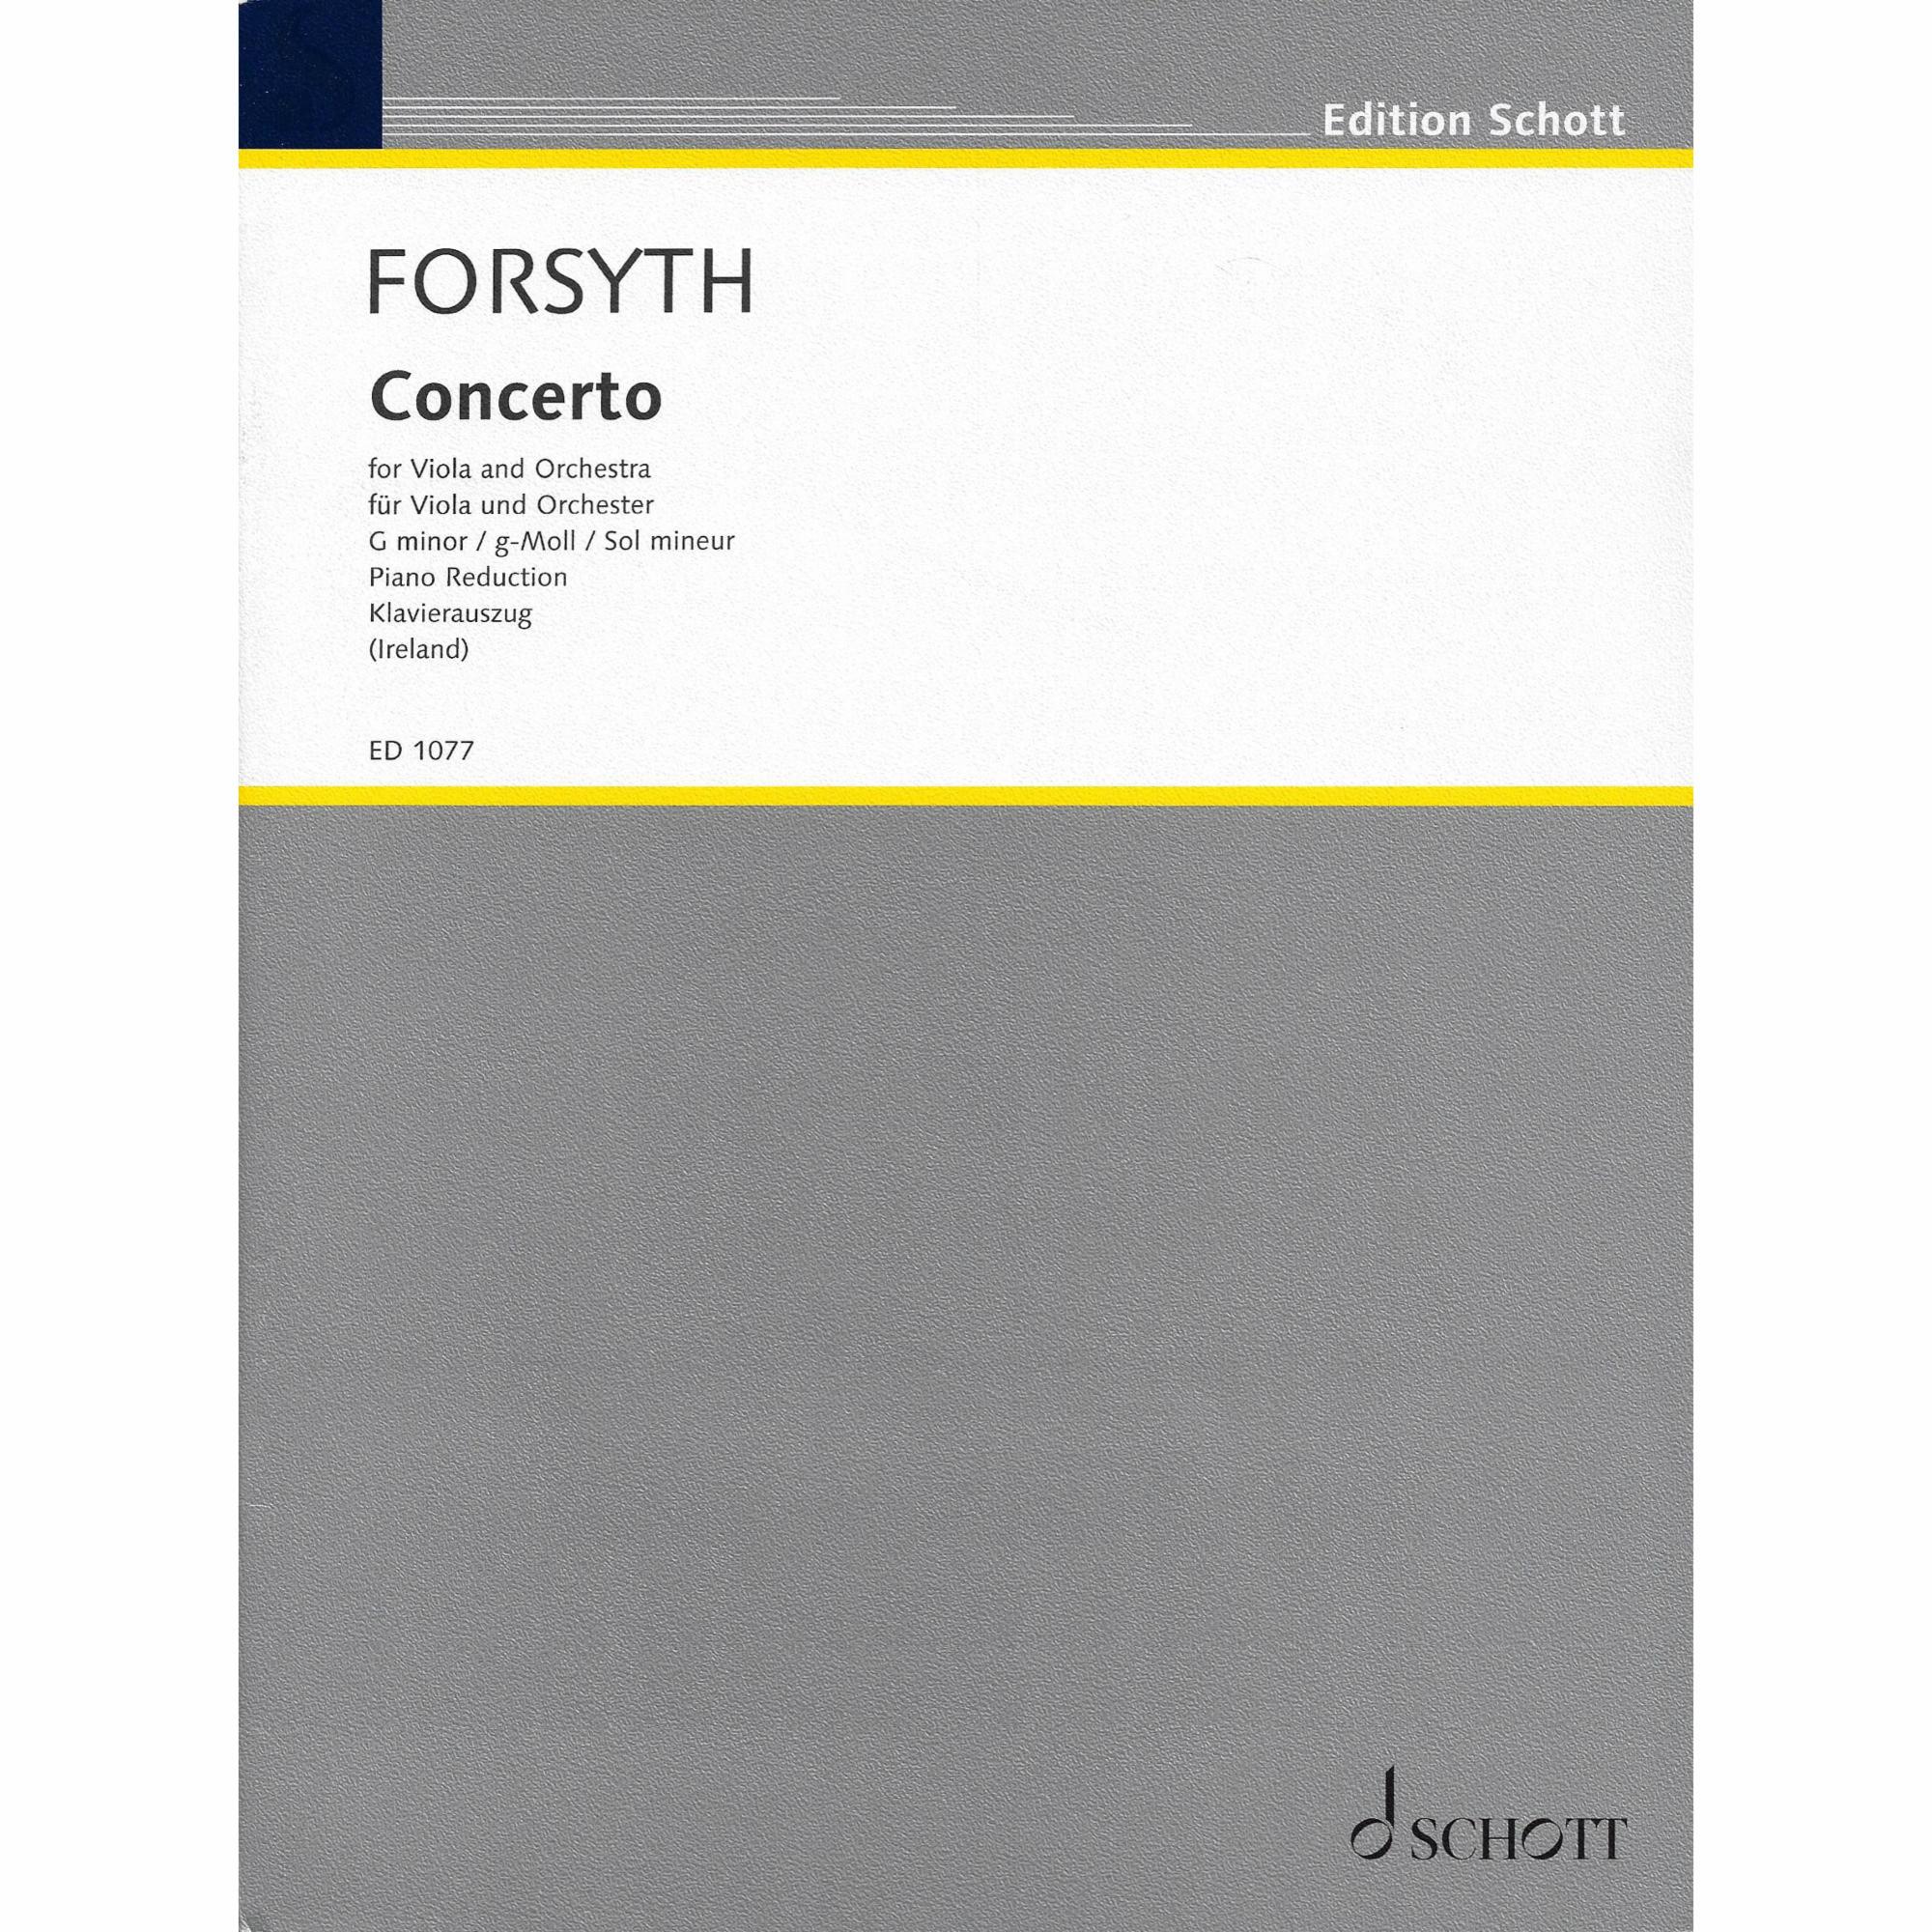 Forsyth -- Concerto in G Minor for Viola and Piano